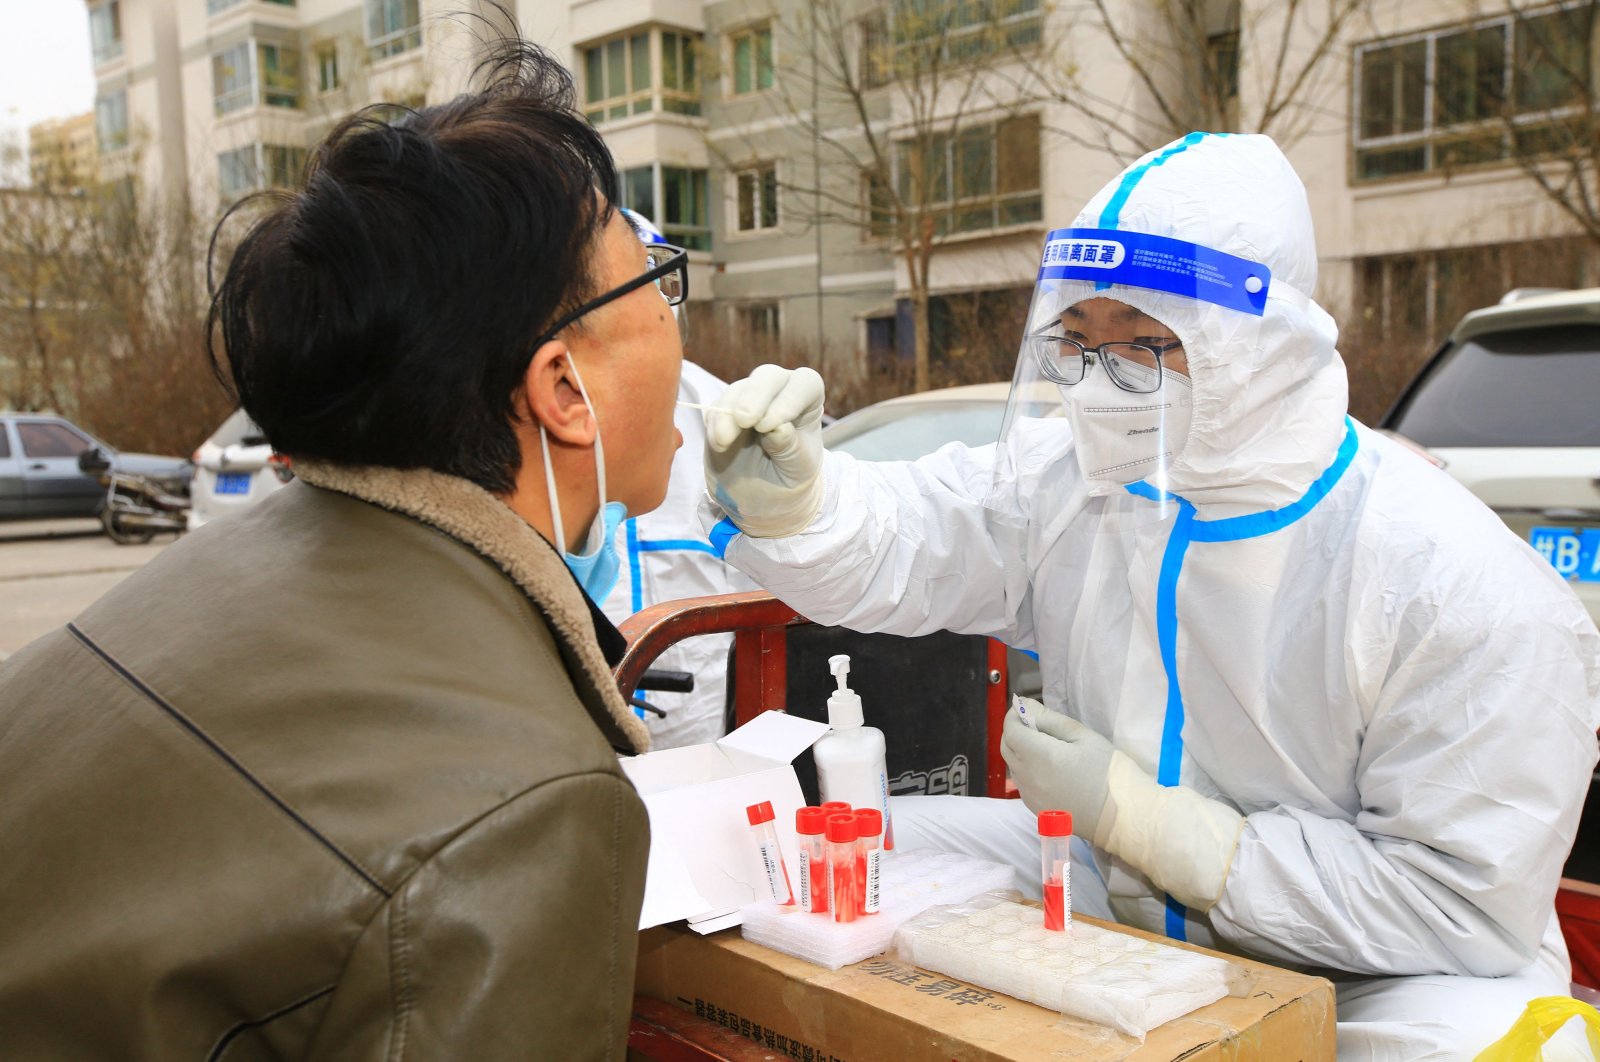 A health worker takes a swab sample from a resident to be tested for COVID-19 coronavirus, Jiayuguan, Gansu province, Nov. 24, 2022. (AFP Photo)